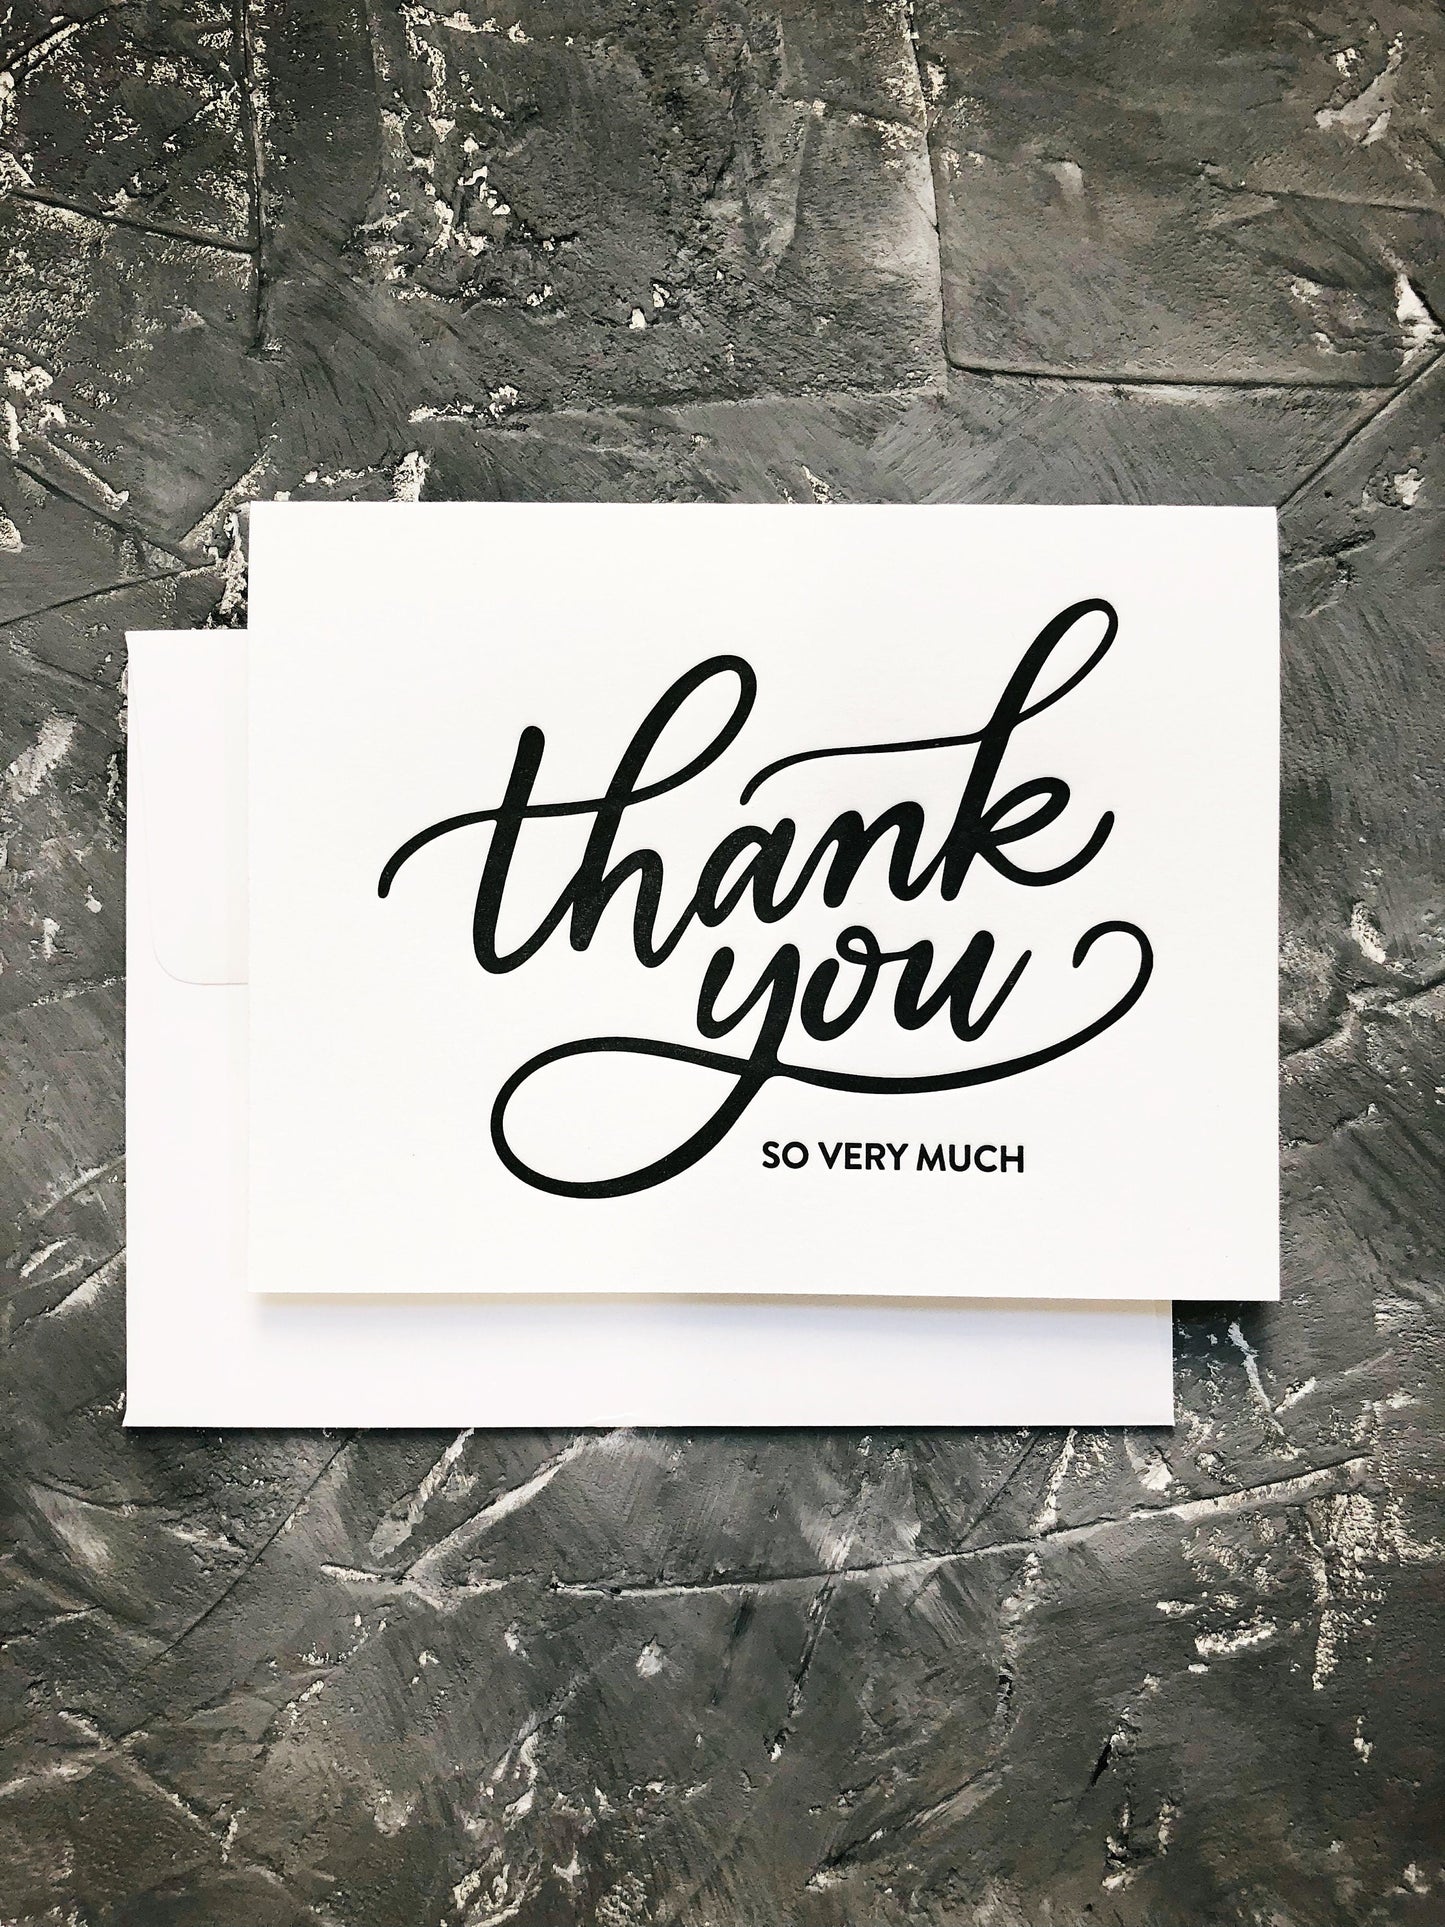 Letterpress Thank You Card with Envelope A2 | Wedding Thank You Cards